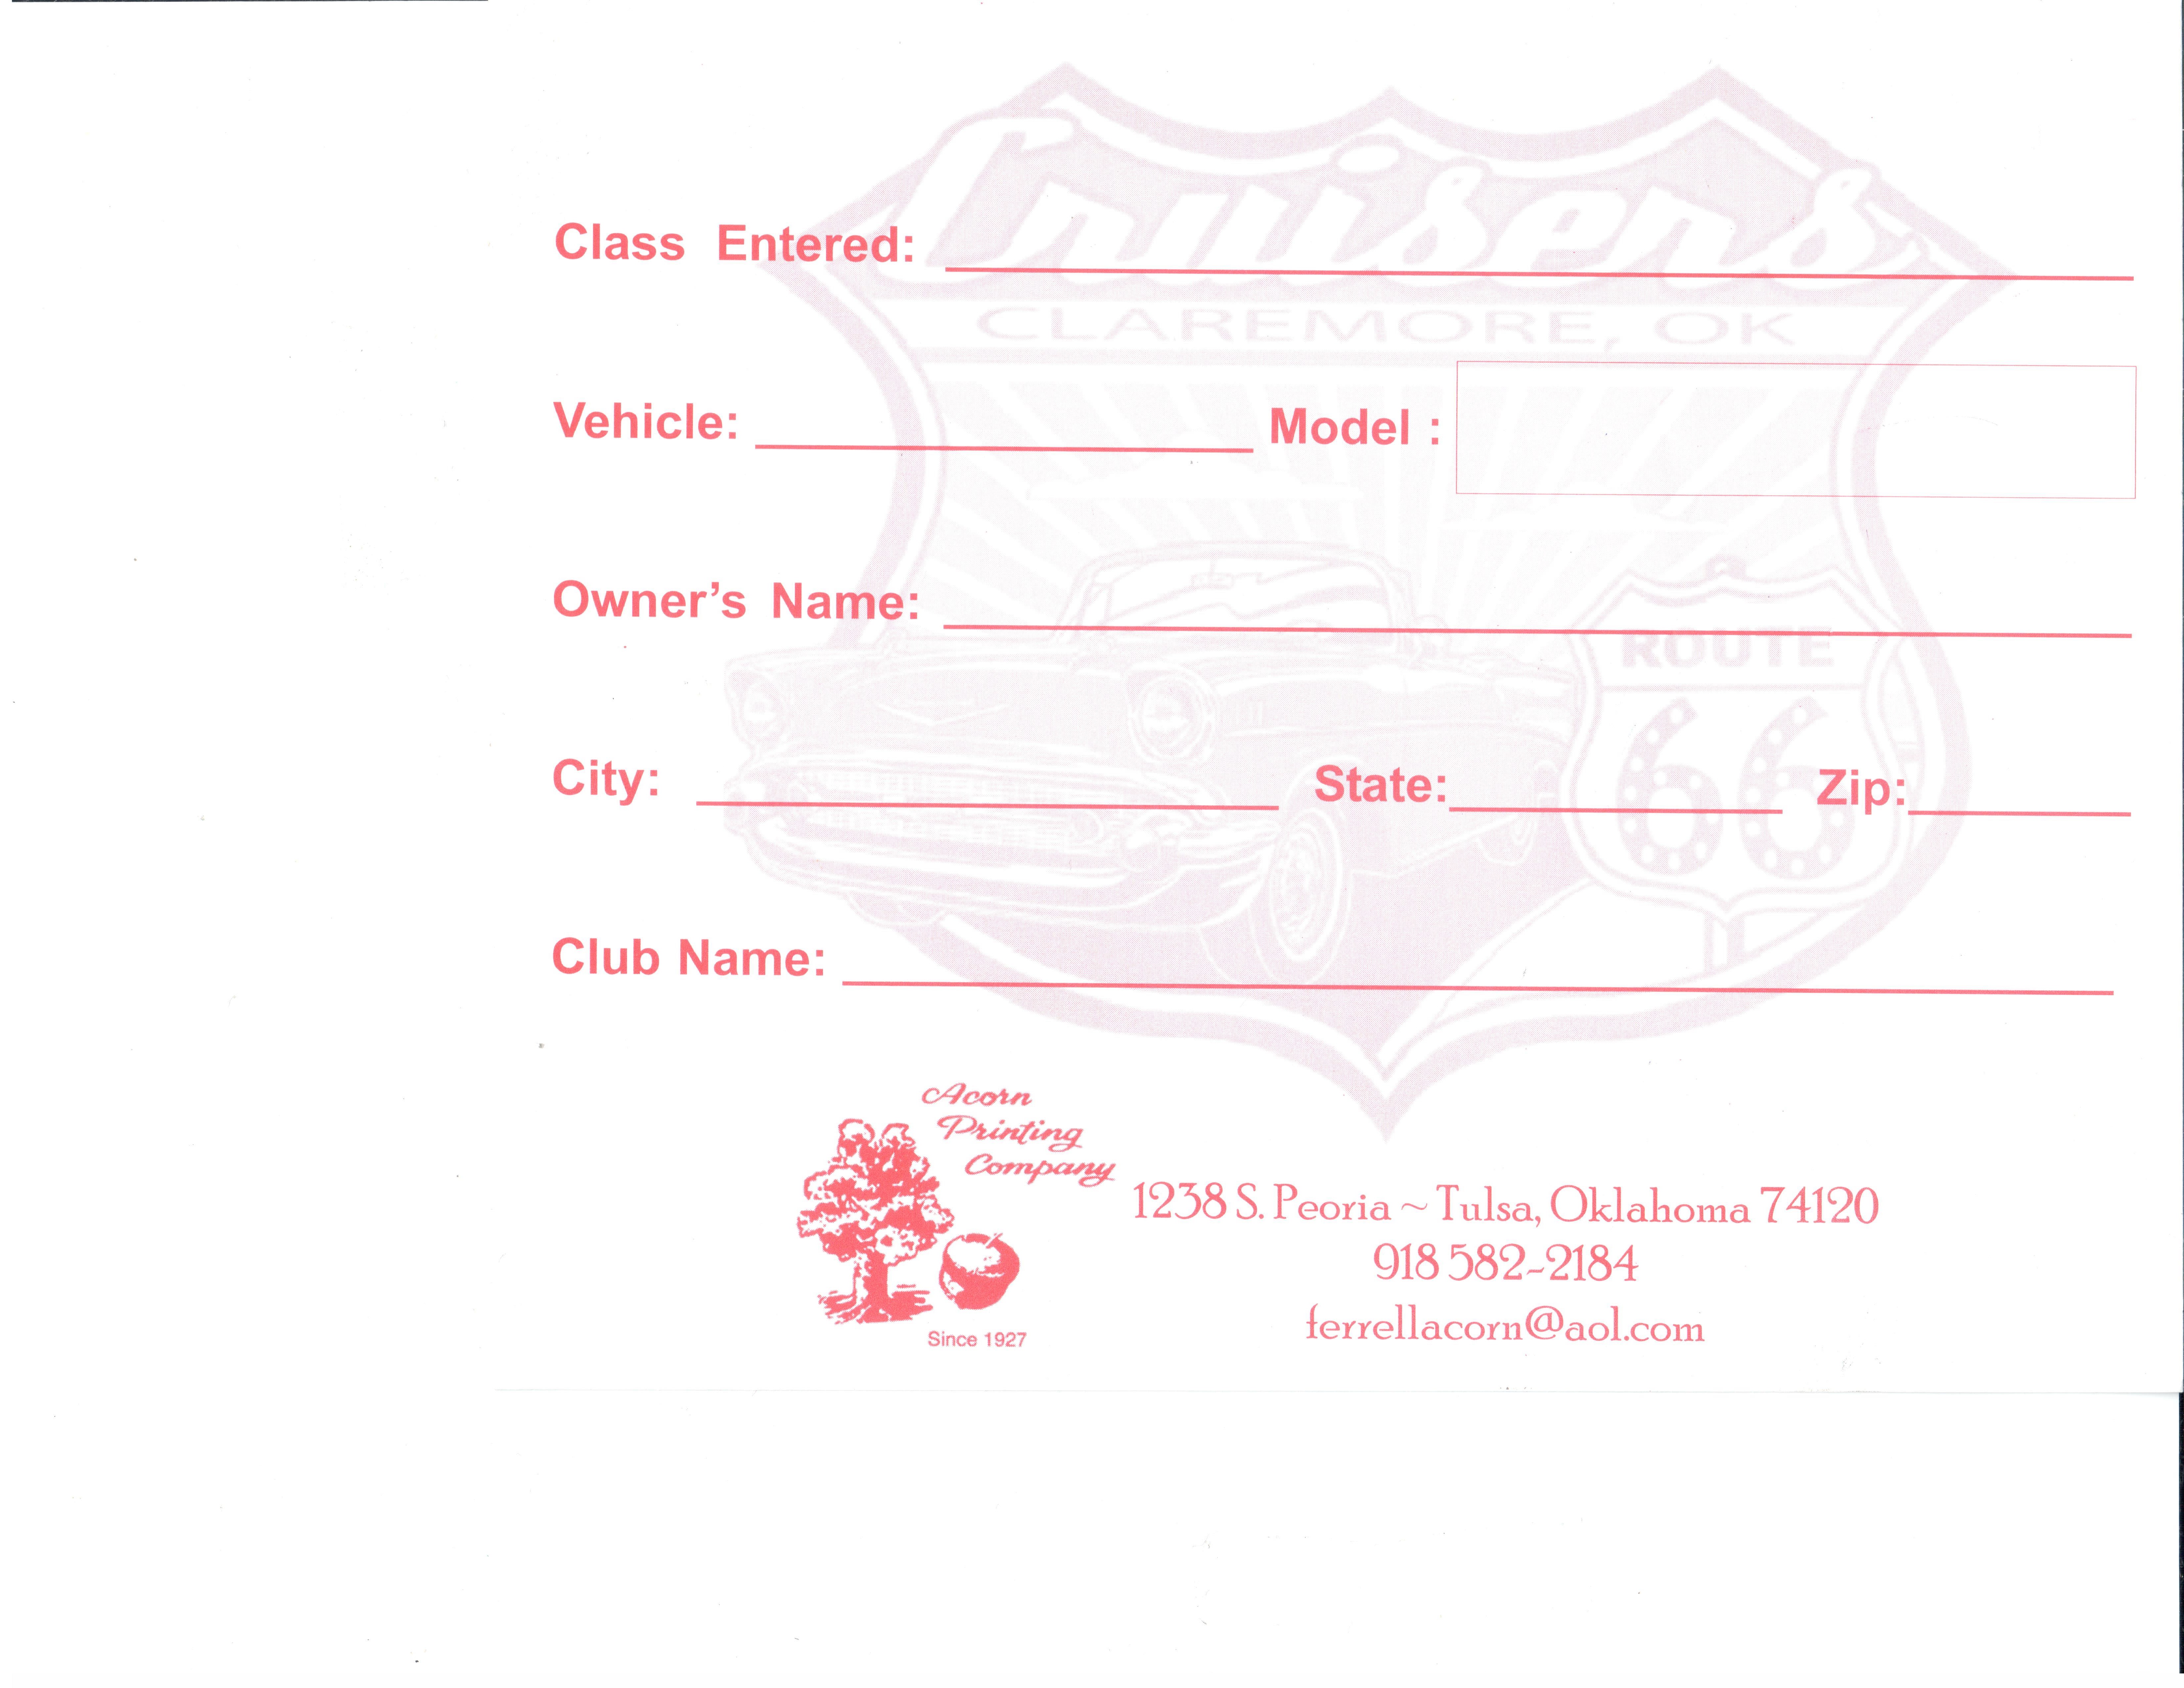 Files for use Route 66 Cruisers Car Club